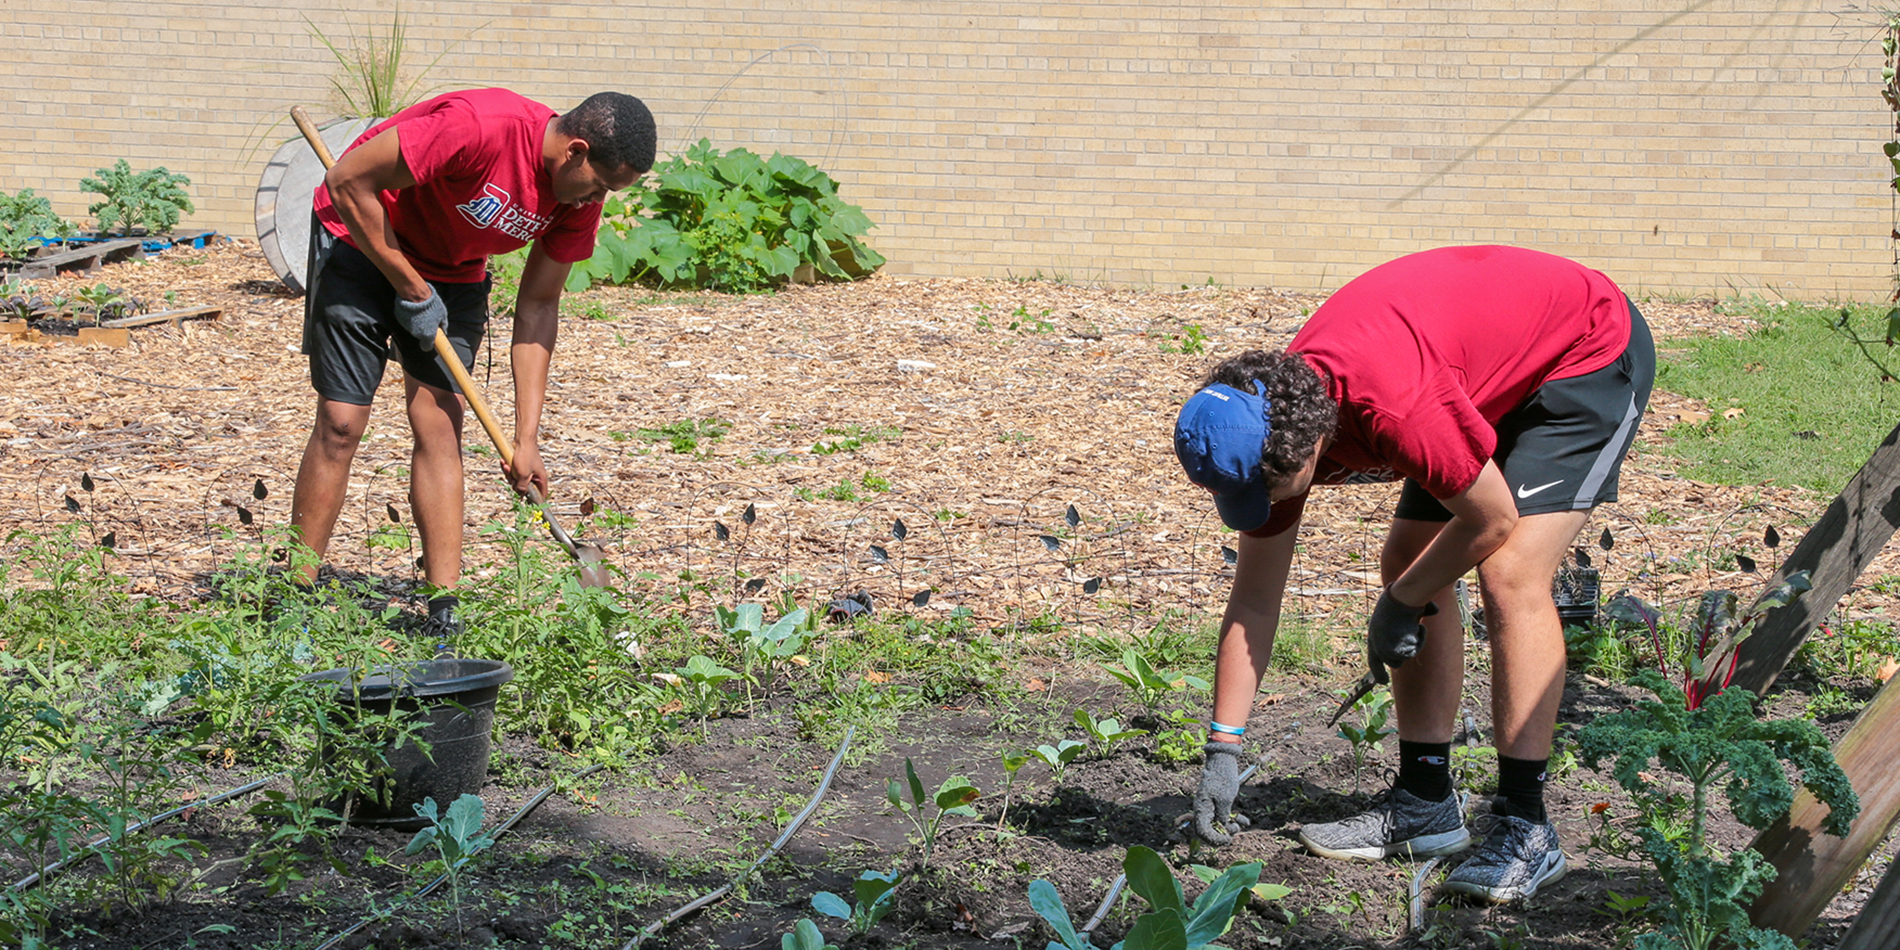 Two students work on clearing weeds and growth from a garden during PTV.